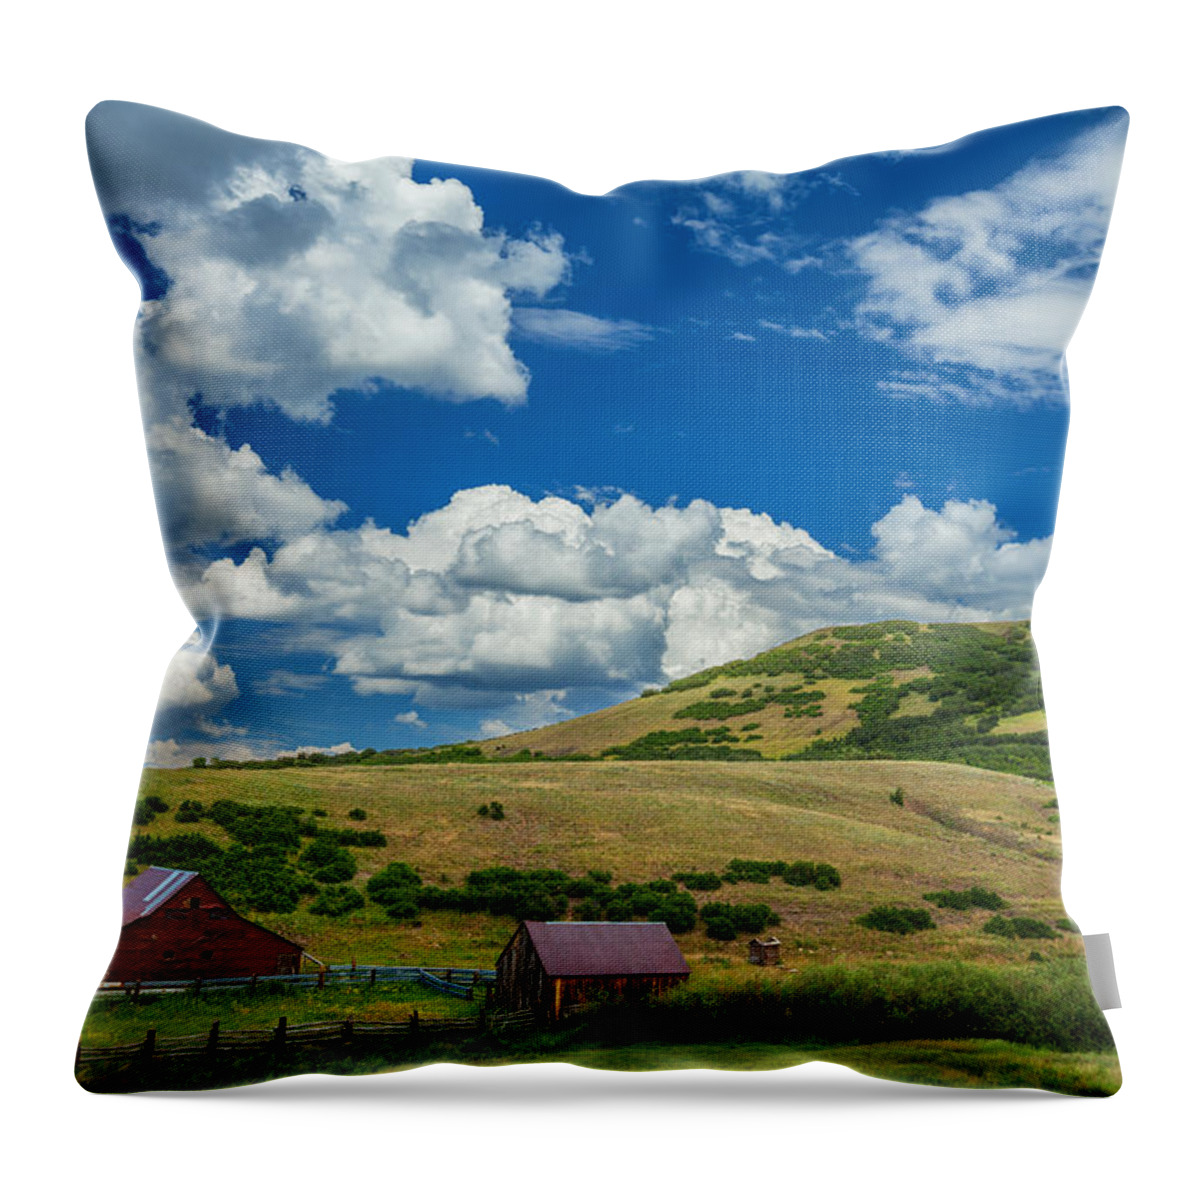 Historic Throw Pillow featuring the photograph Last Dollar Homestead by Darren White